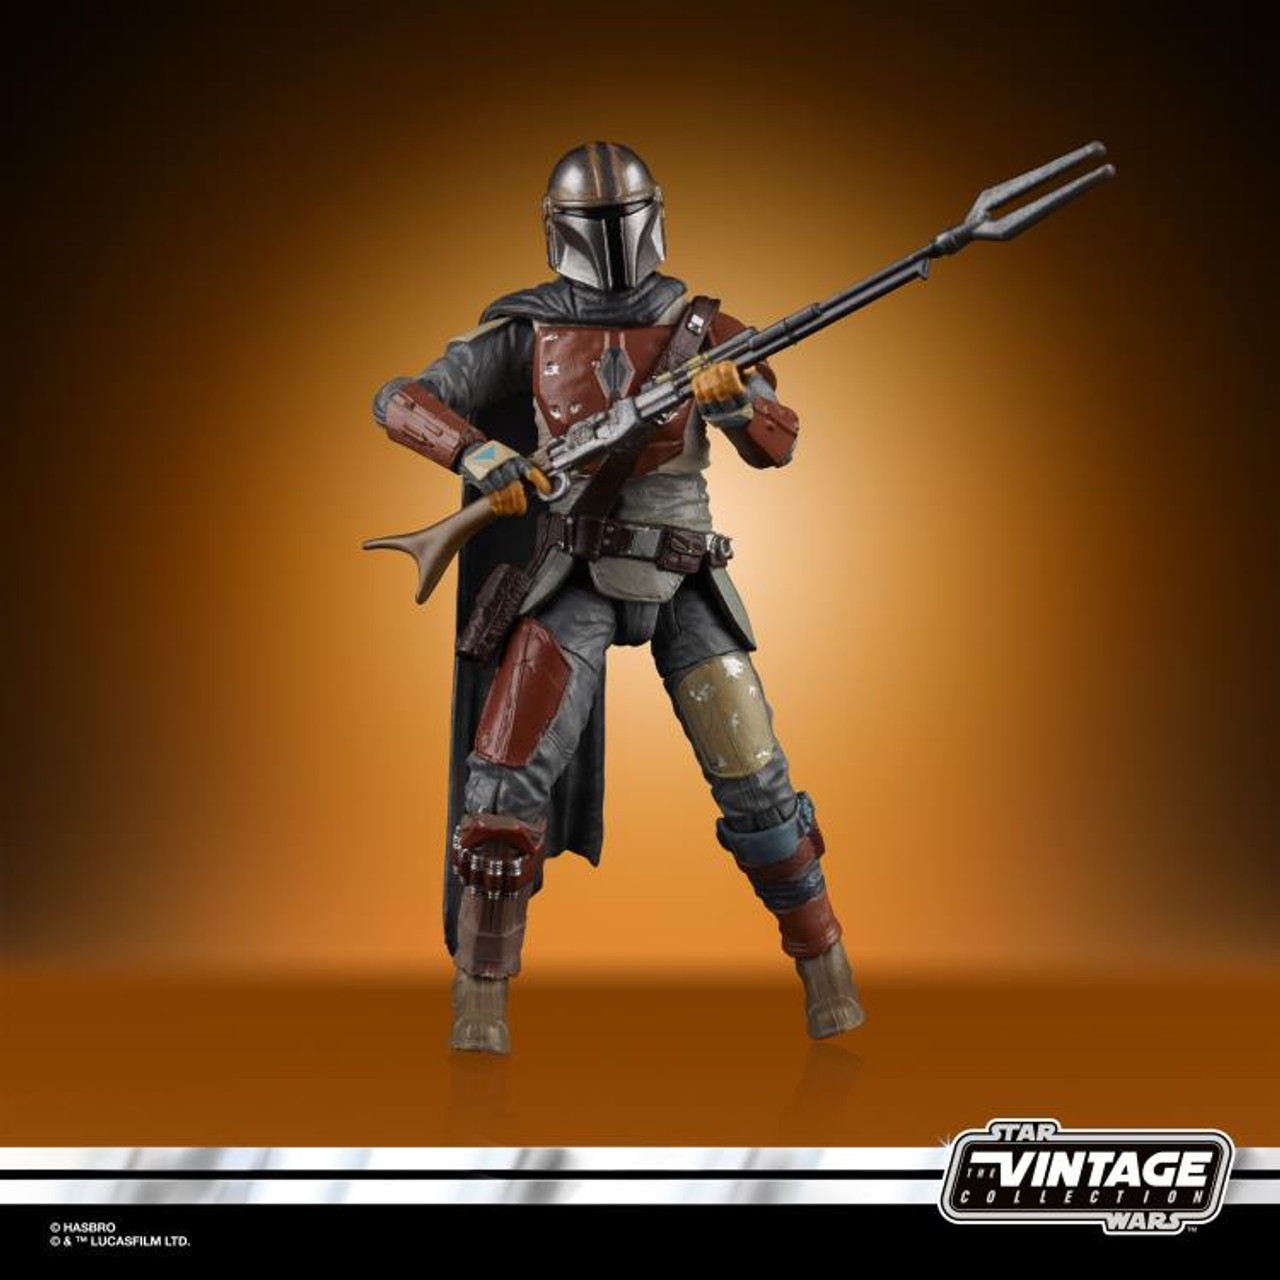 Star Wars ~ The Vintage Collection ~ The Mandalorian 3 3/4-Inch Figure